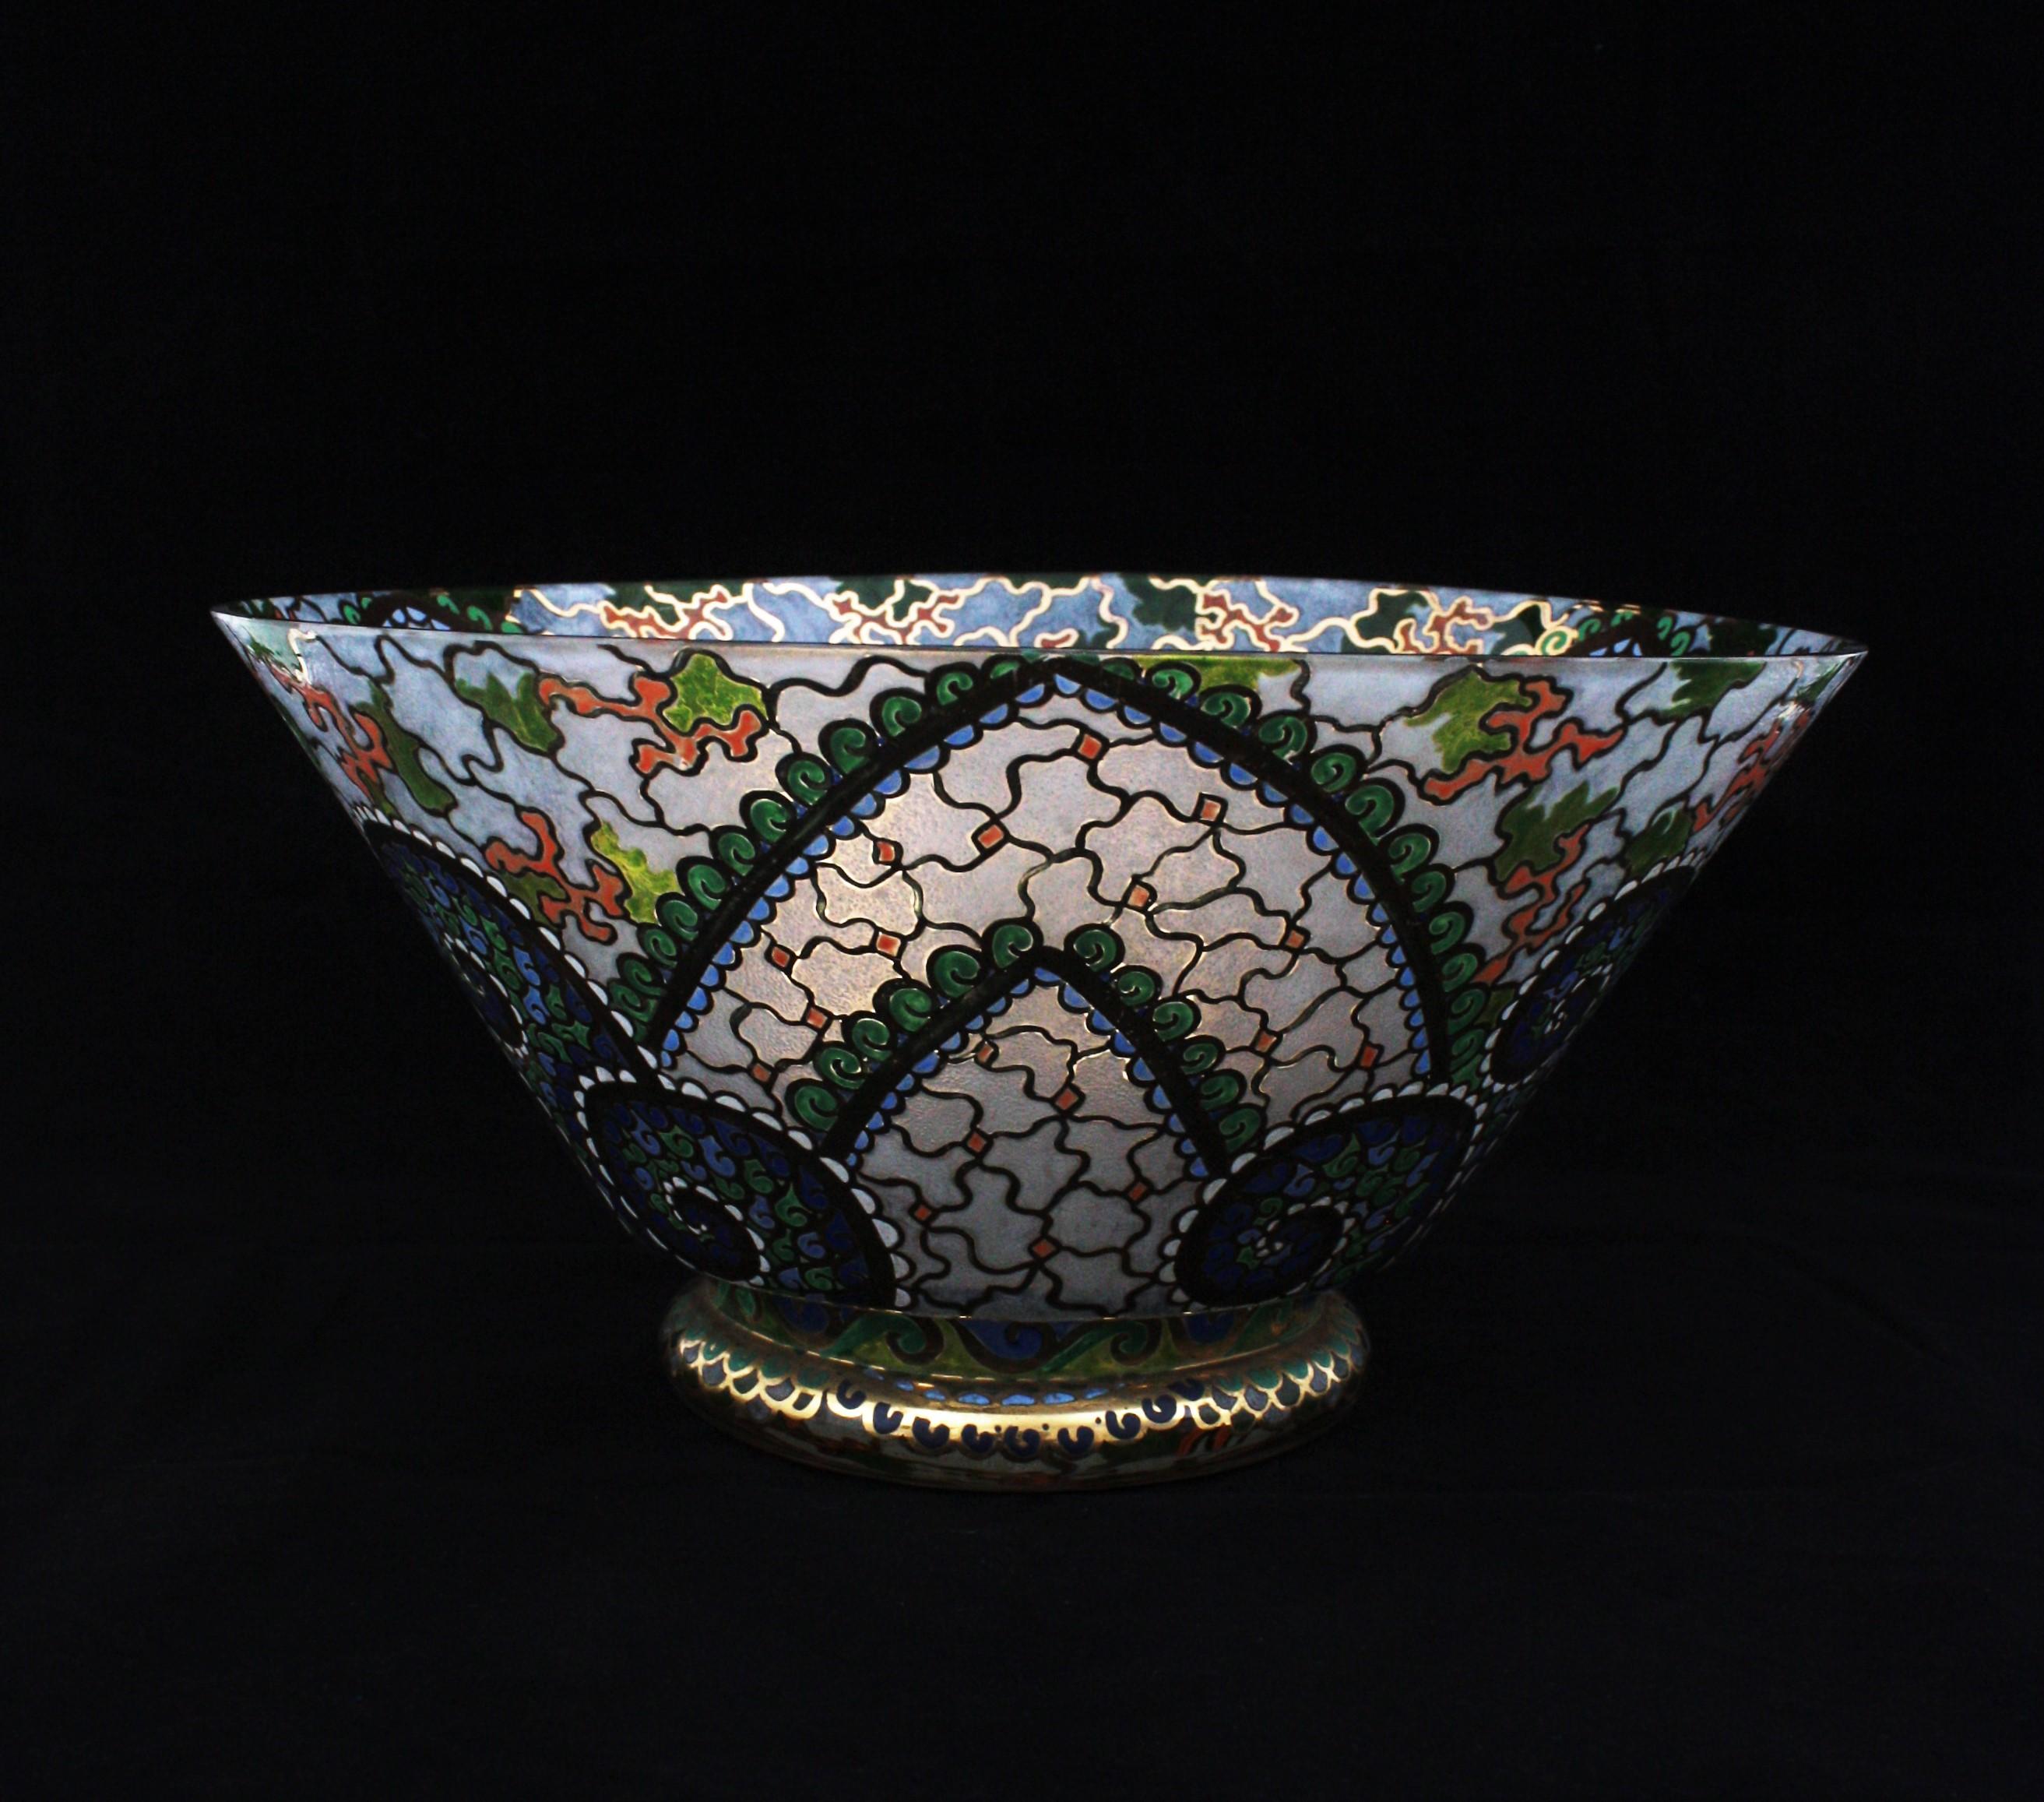 Art Deco Hand Painted Enameled Polychrome & Gold Glass Centerpiece Bowl by Riera 1